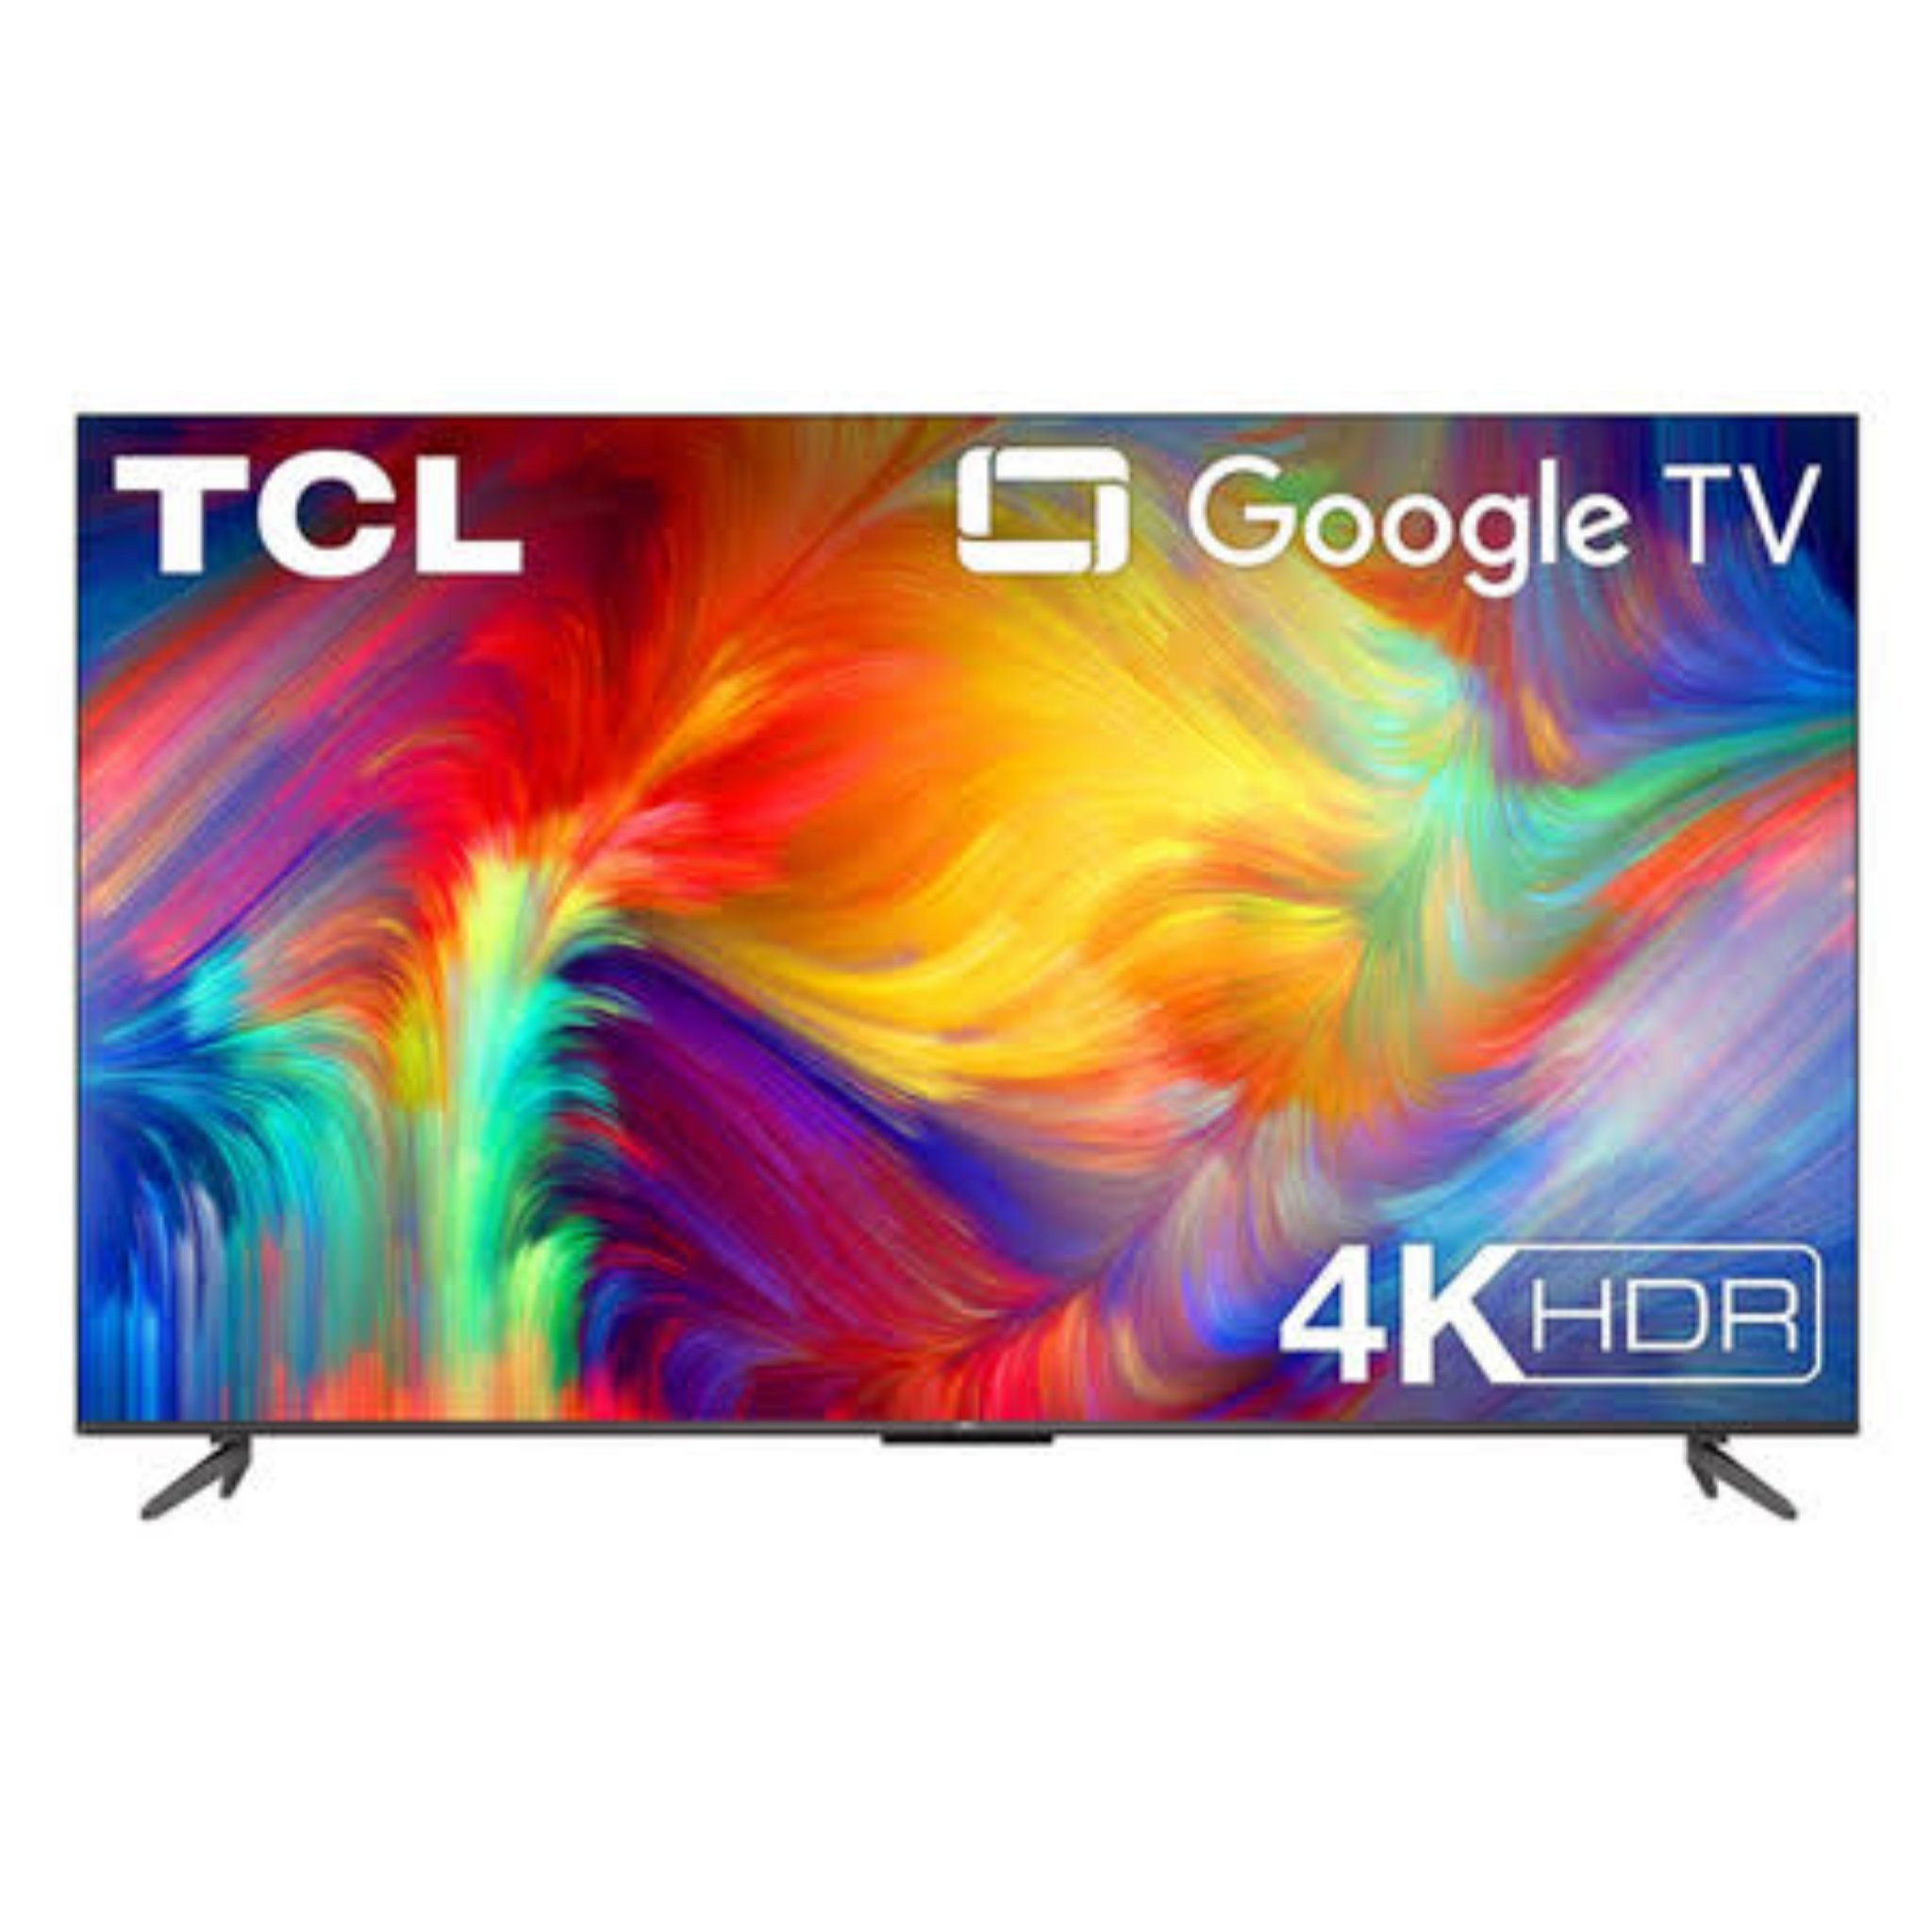 Tcl 43 inch 43P735 4k UHD Android Tv